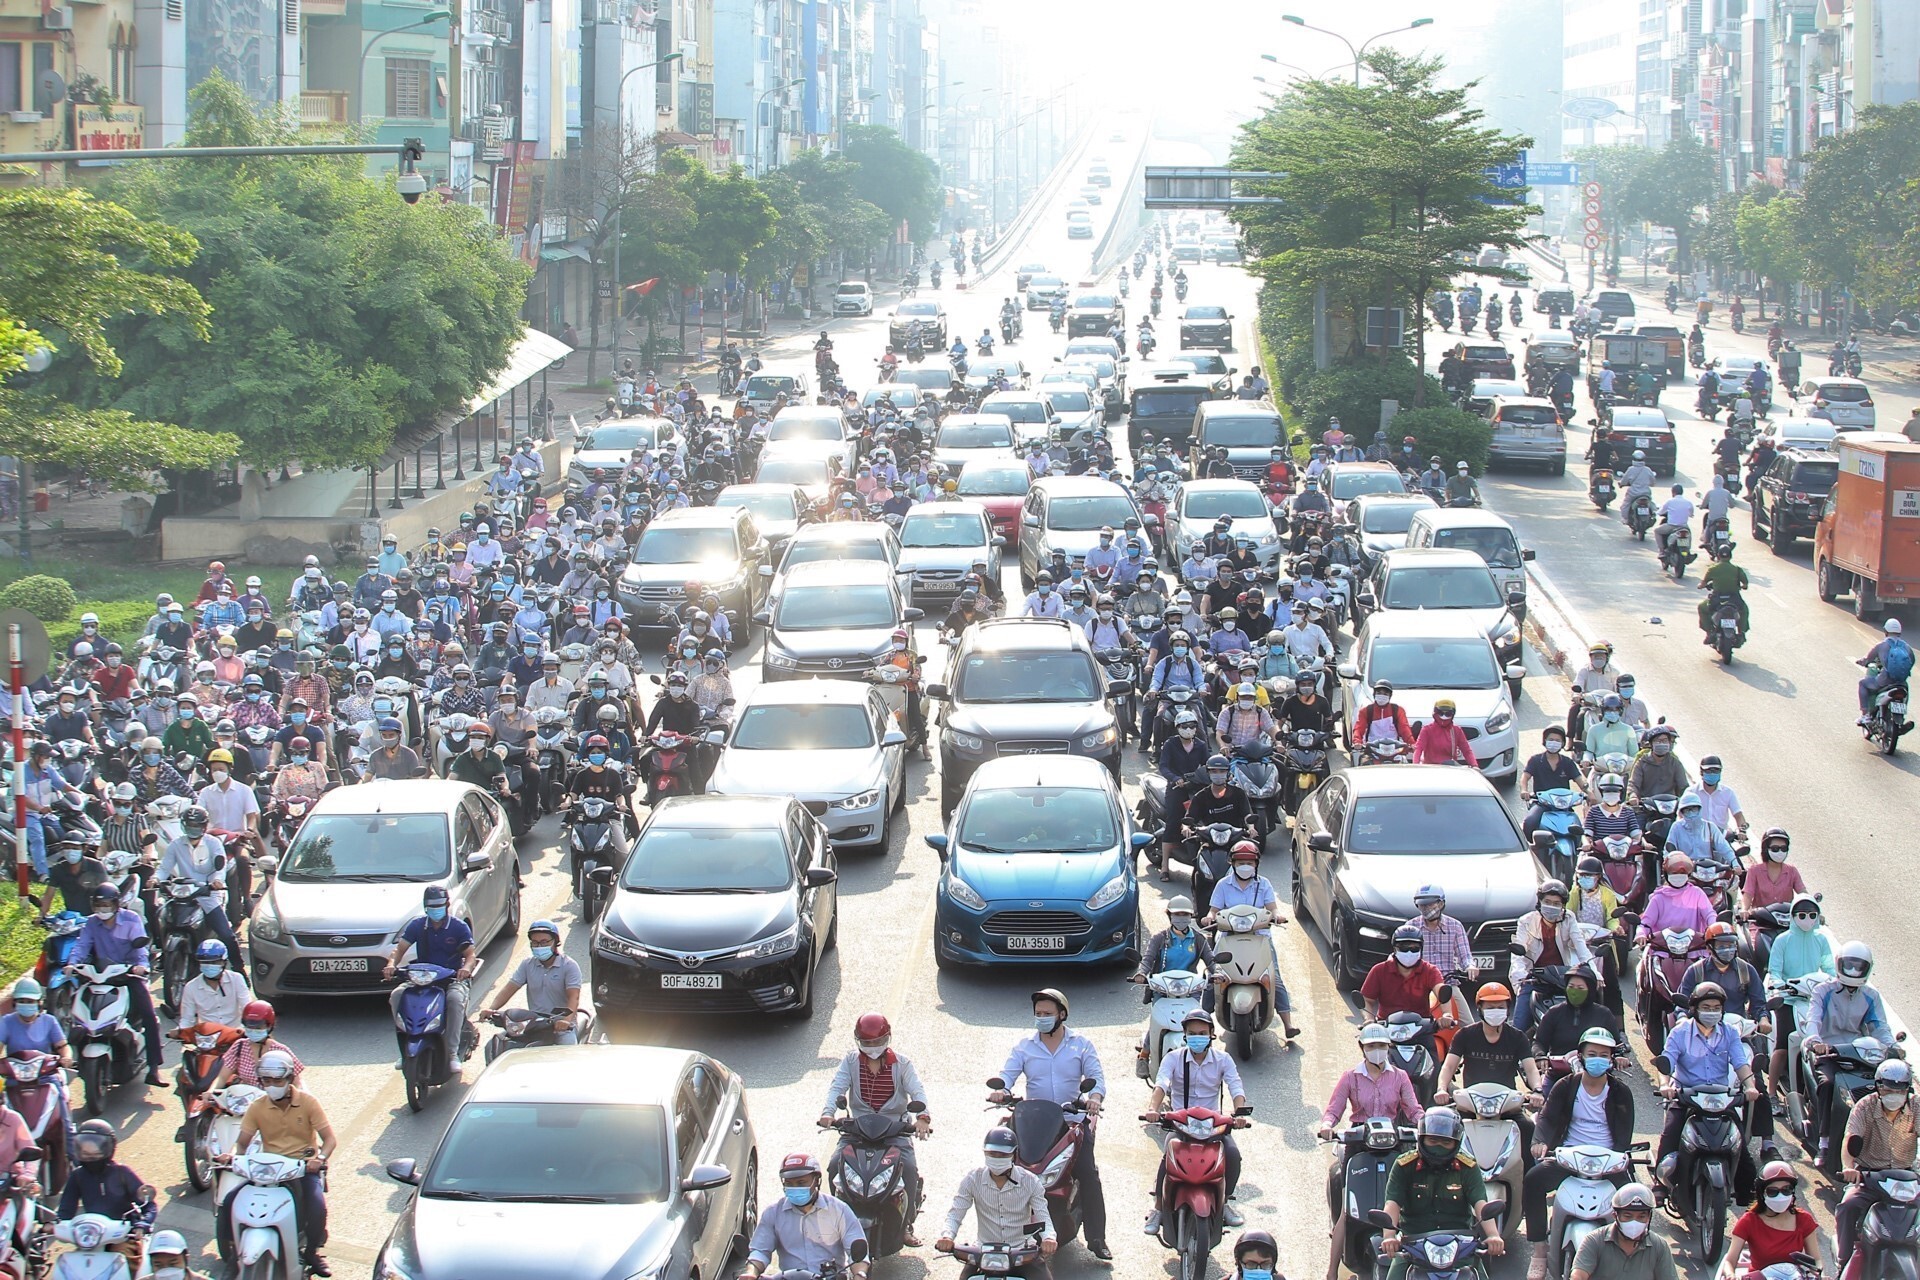 Heavy traffic in Hanoi on Wednesday following the easing of Covid-19 restrictions in the Vietnamese capital. Photo: Xinhua